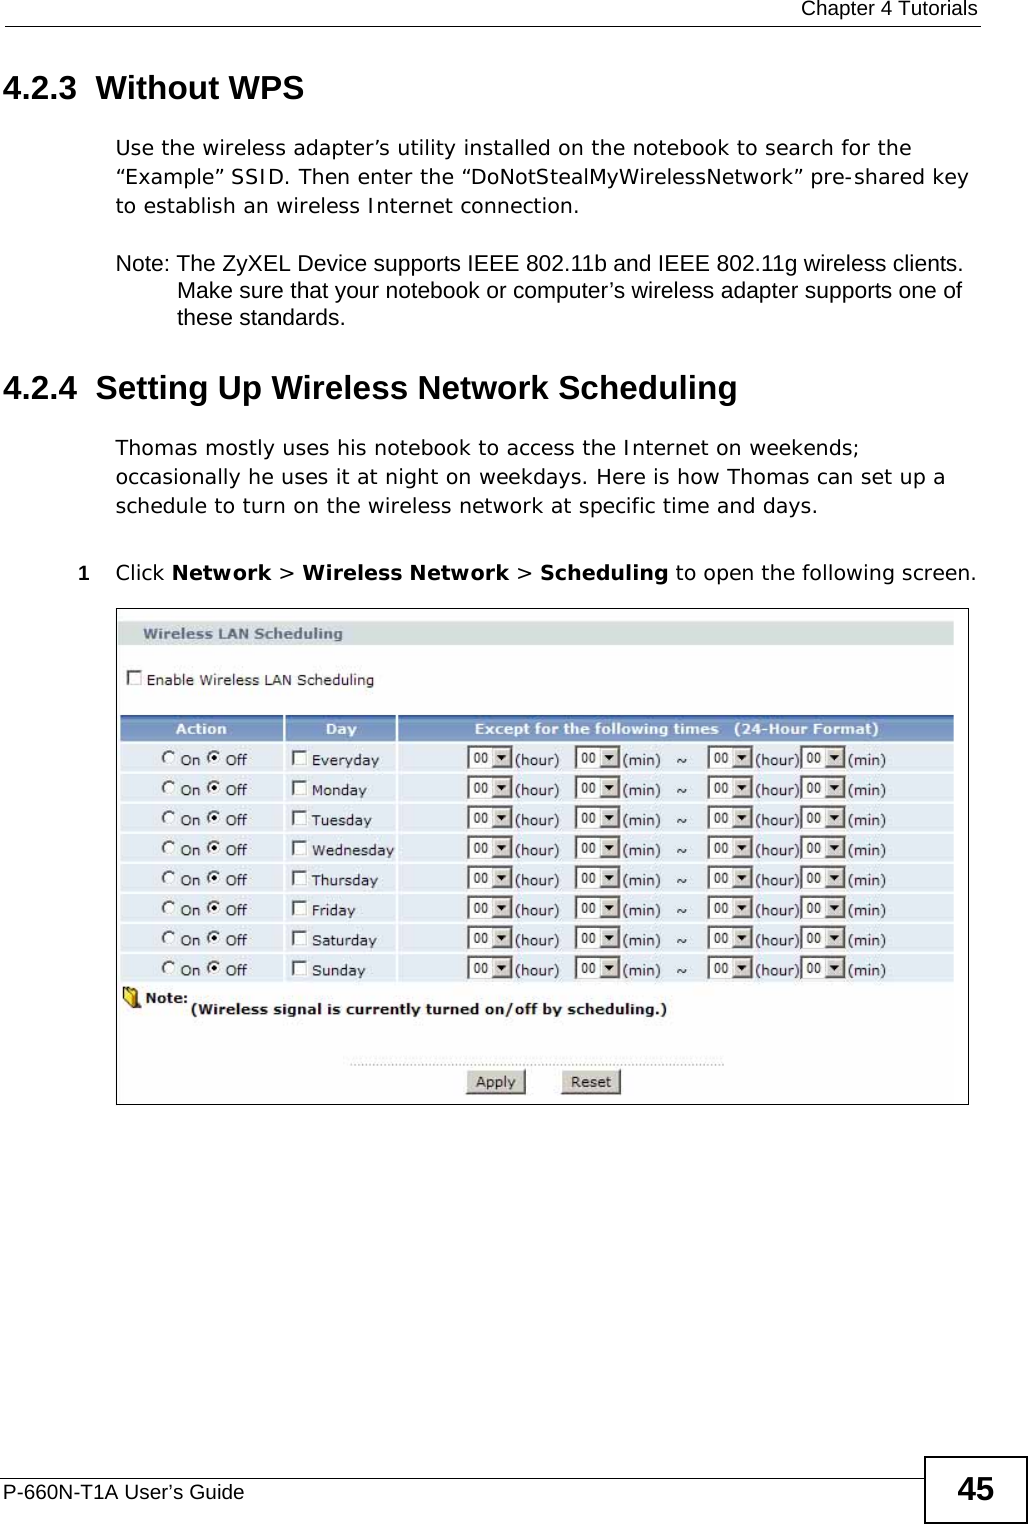  Chapter 4 TutorialsP-660N-T1A User’s Guide 454.2.3  Without WPSUse the wireless adapter’s utility installed on the notebook to search for the “Example” SSID. Then enter the “DoNotStealMyWirelessNetwork” pre-shared key to establish an wireless Internet connection.Note: The ZyXEL Device supports IEEE 802.11b and IEEE 802.11g wireless clients. Make sure that your notebook or computer’s wireless adapter supports one of these standards.4.2.4  Setting Up Wireless Network SchedulingThomas mostly uses his notebook to access the Internet on weekends; occasionally he uses it at night on weekdays. Here is how Thomas can set up a schedule to turn on the wireless network at specific time and days.1Click Network &gt; Wireless Network &gt; Scheduling to open the following screen.